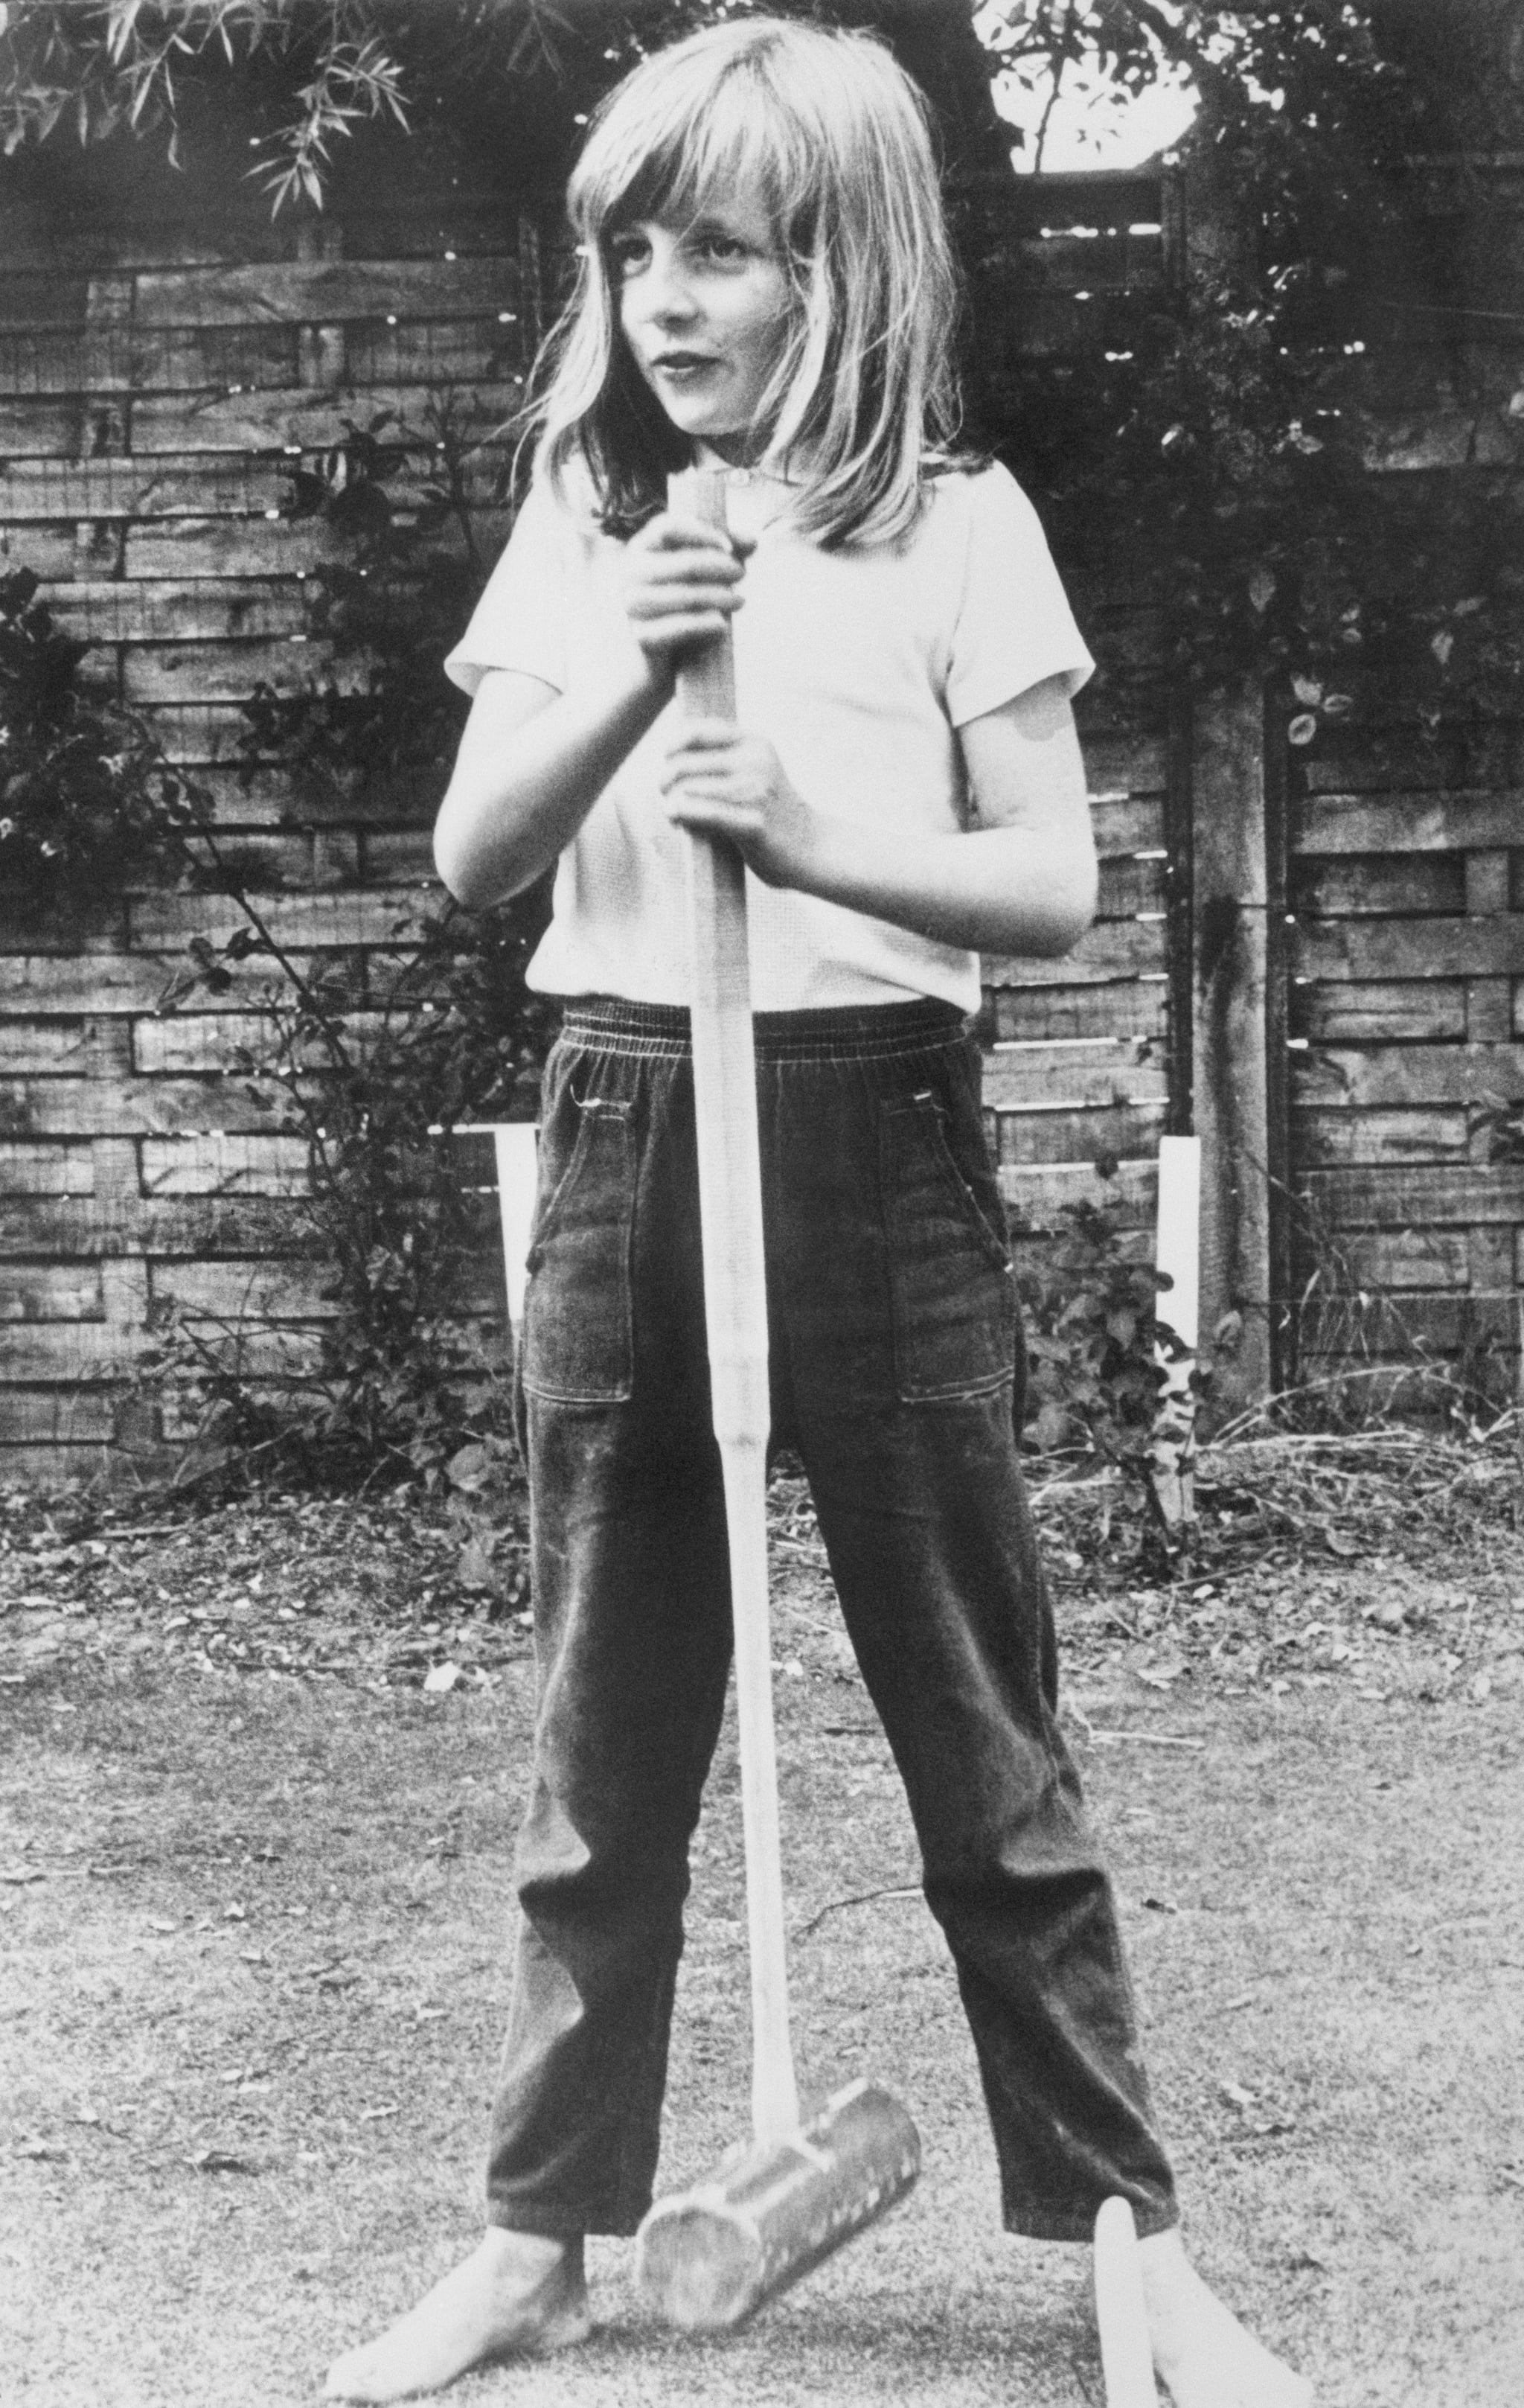 (Original Caption) Little Lady Diana. Itchenor, England: Lady Diana Spencer is to be 20 July 1. She and Britain's Prince Charles are to marry. In this picture, taken in summer, 1970, a barefoot Lady Diana poses with a croquet mallet while on holiday in Itchenor, West Sussex.